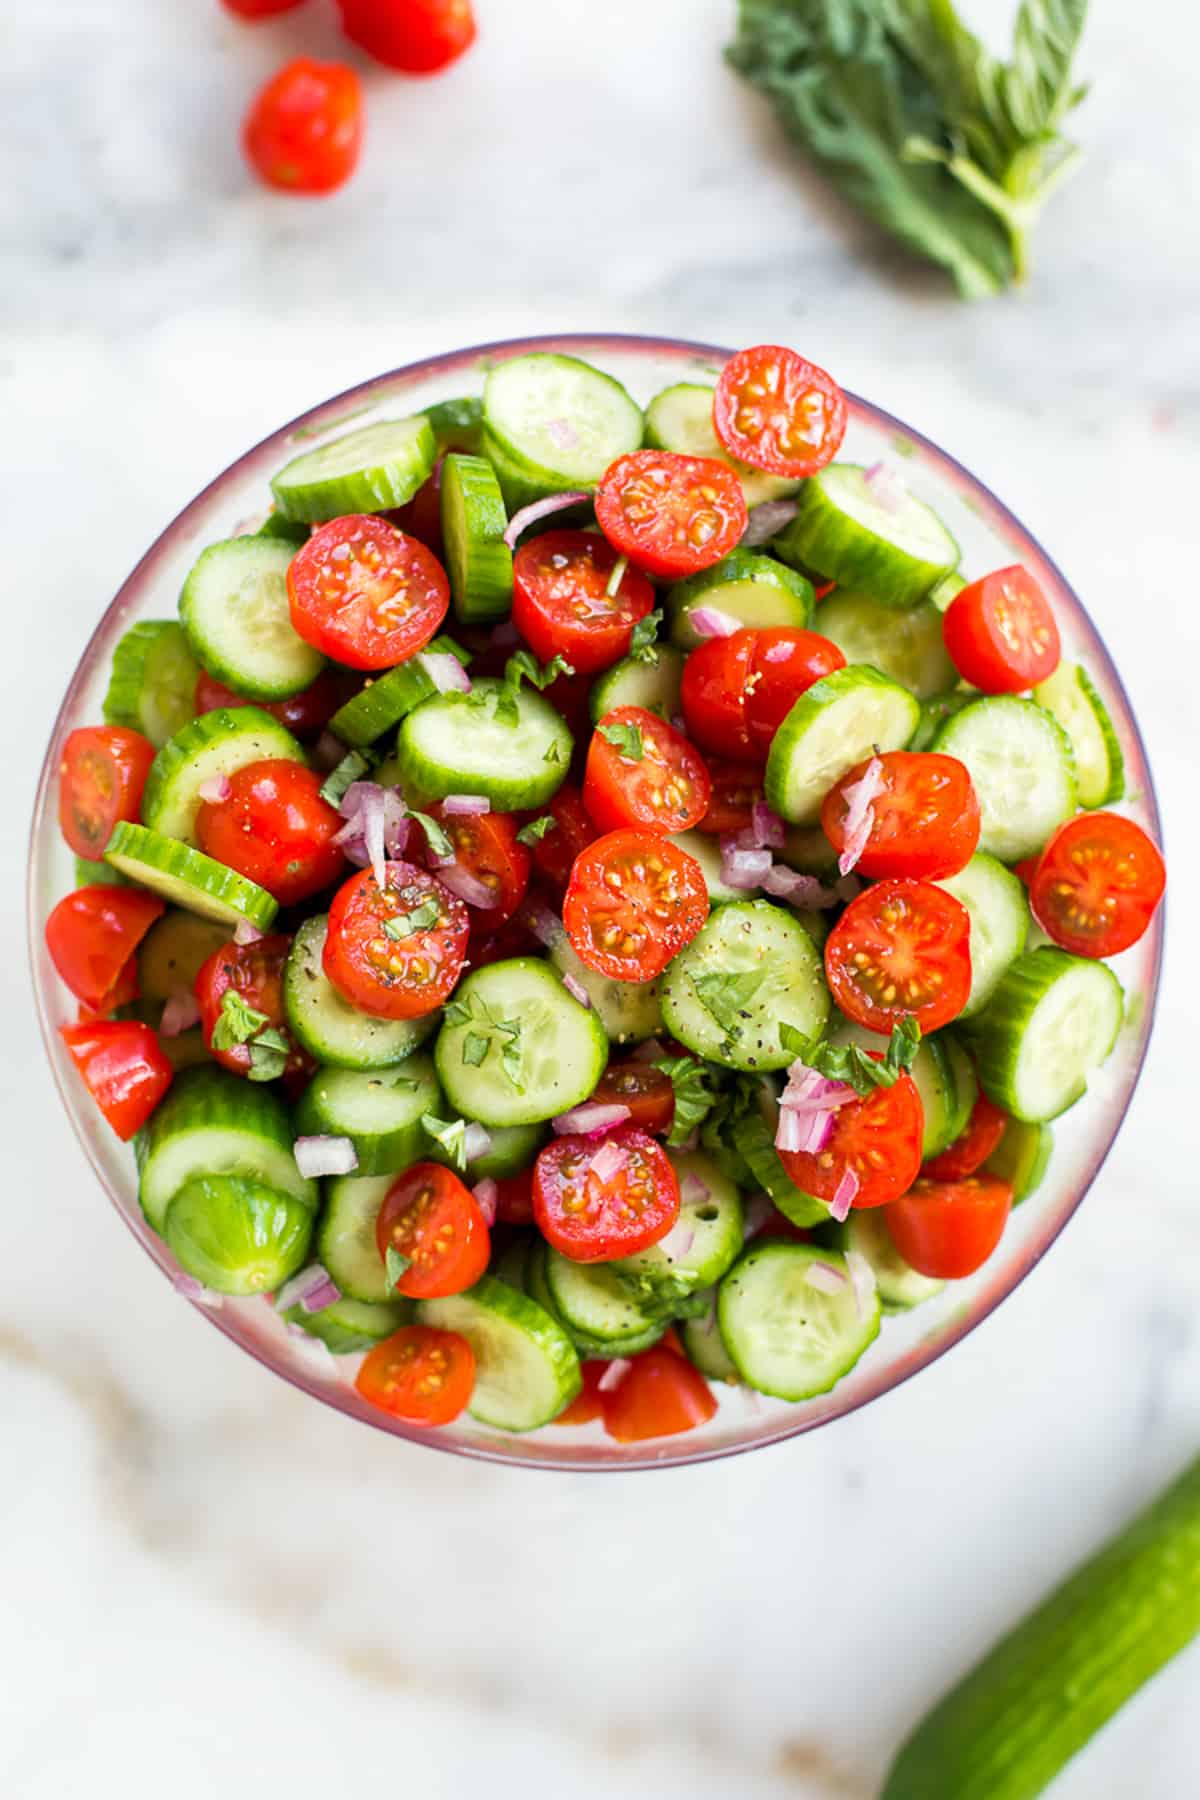 An easy cucumber and tomato salad with fresh vegetables in a glass bowl.